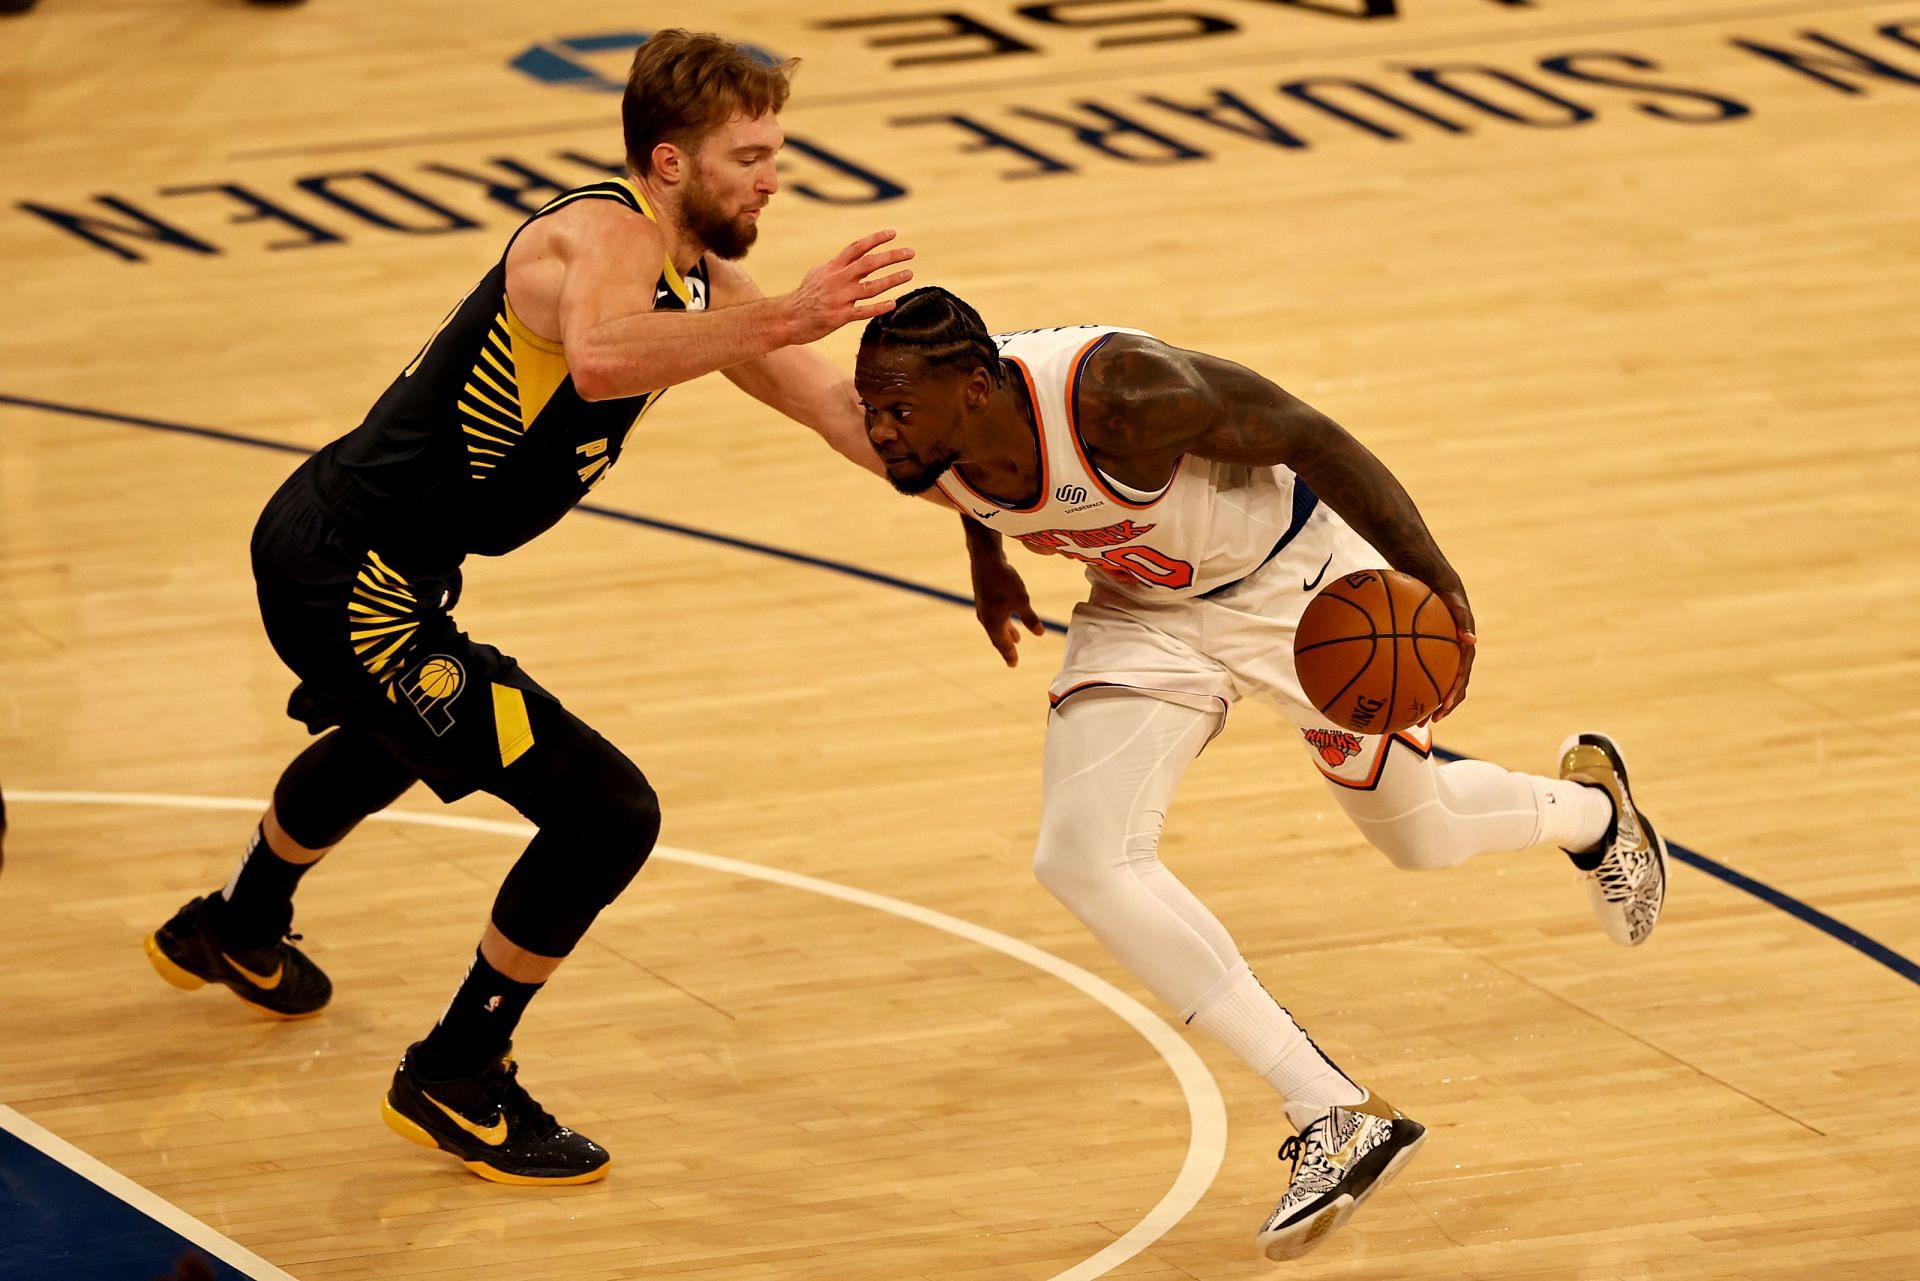 Domantas Sabonis and Julius Randle will lead their respective teams as the Indiana Pacers will host the New York Knicks on Wednesday. [Photo: Daily Knicks]